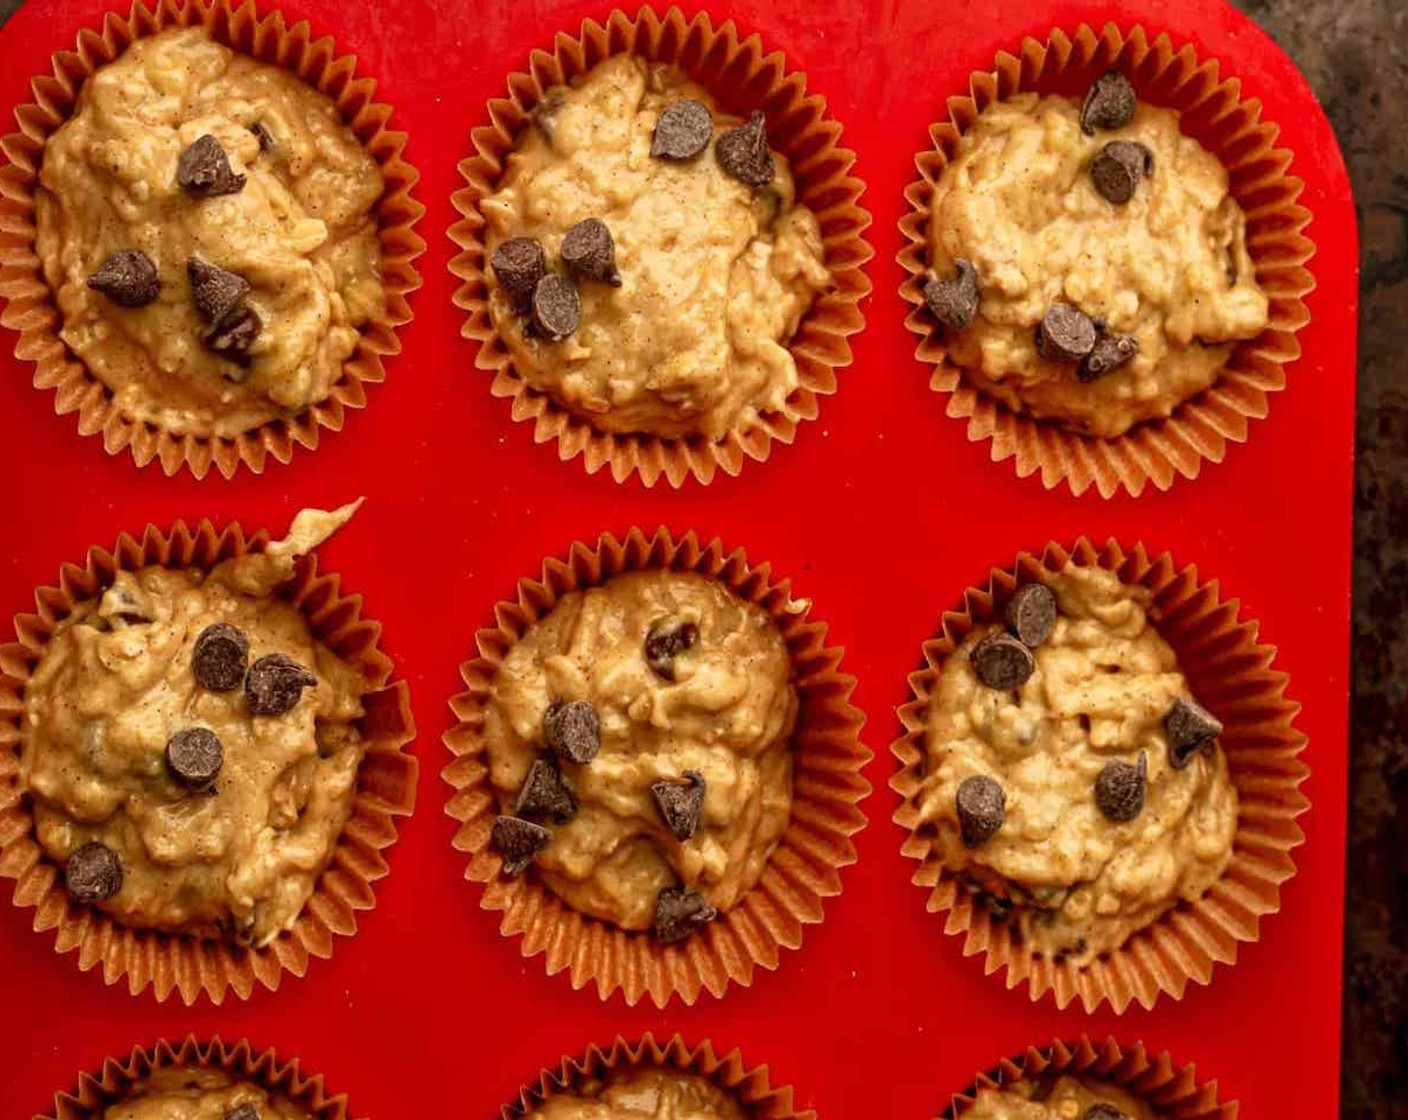 step 4 Evenly distribute the batter throughout the muffin tin, filling each cup almost to the top, about 3/4 way full. Sprinkle additional oats and chocolate chips on the top of each muffin, if desired.